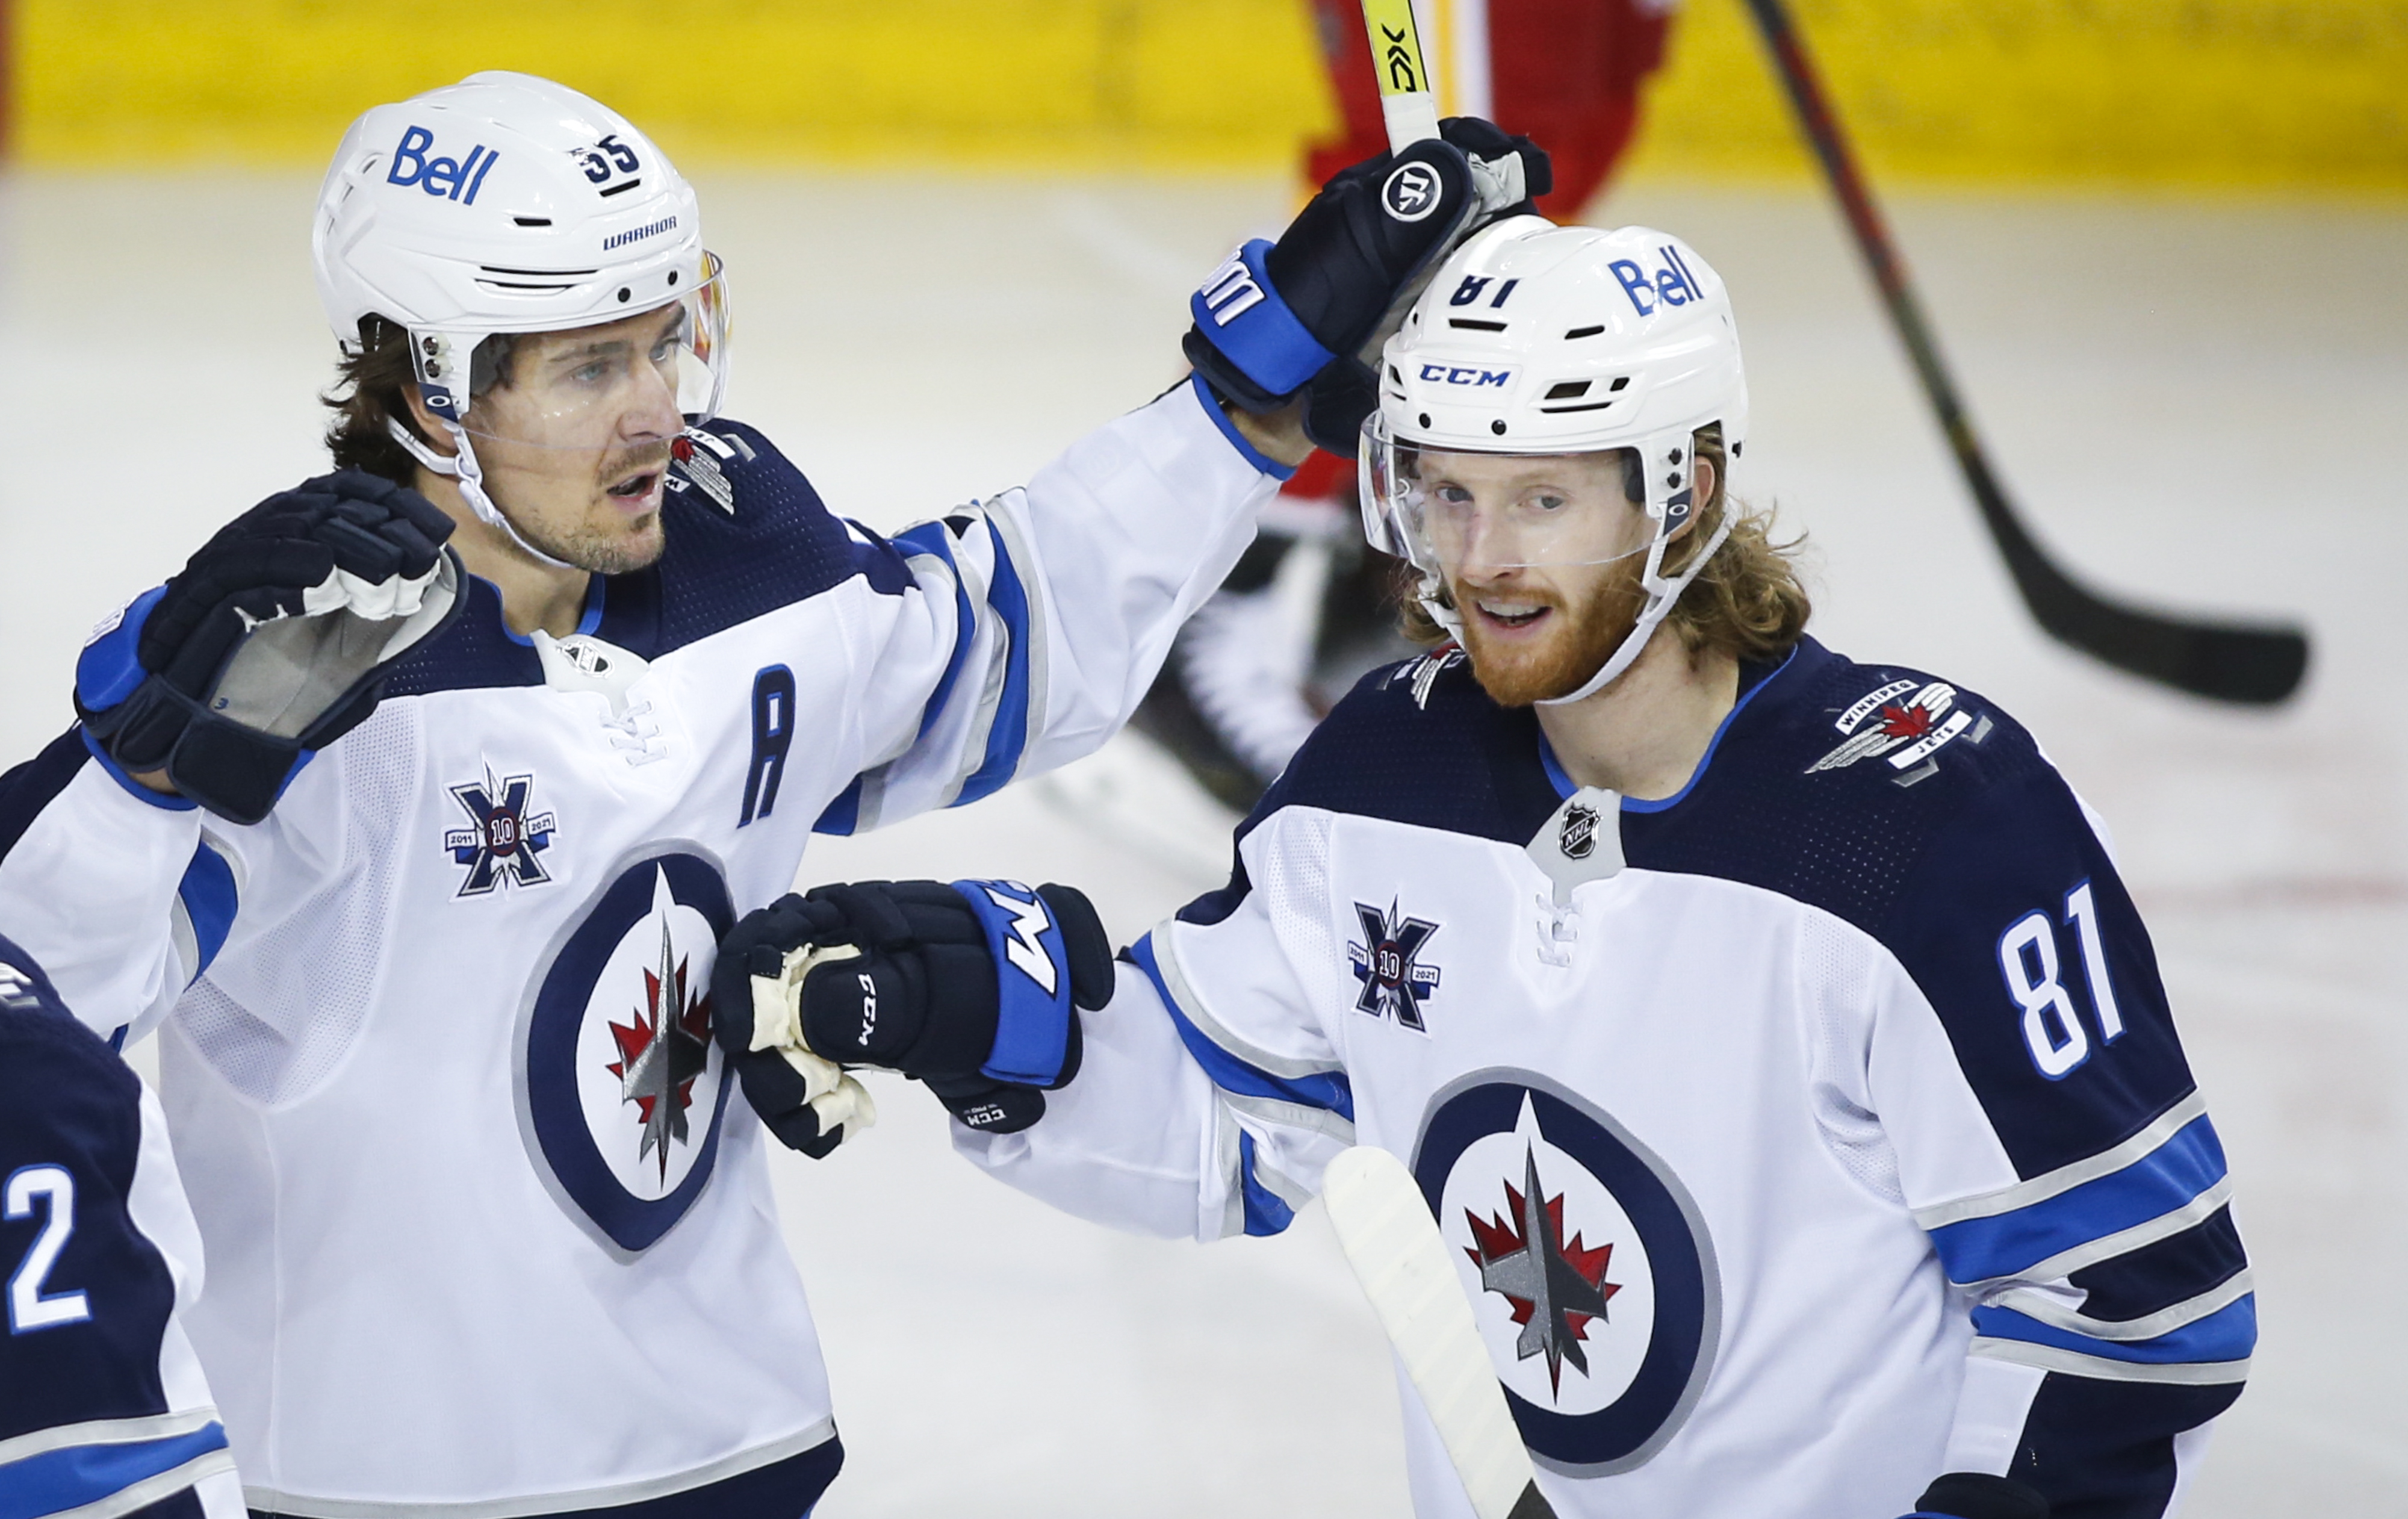 Jets defenceman Josh Morrissey named NHL's Second Star of the Week